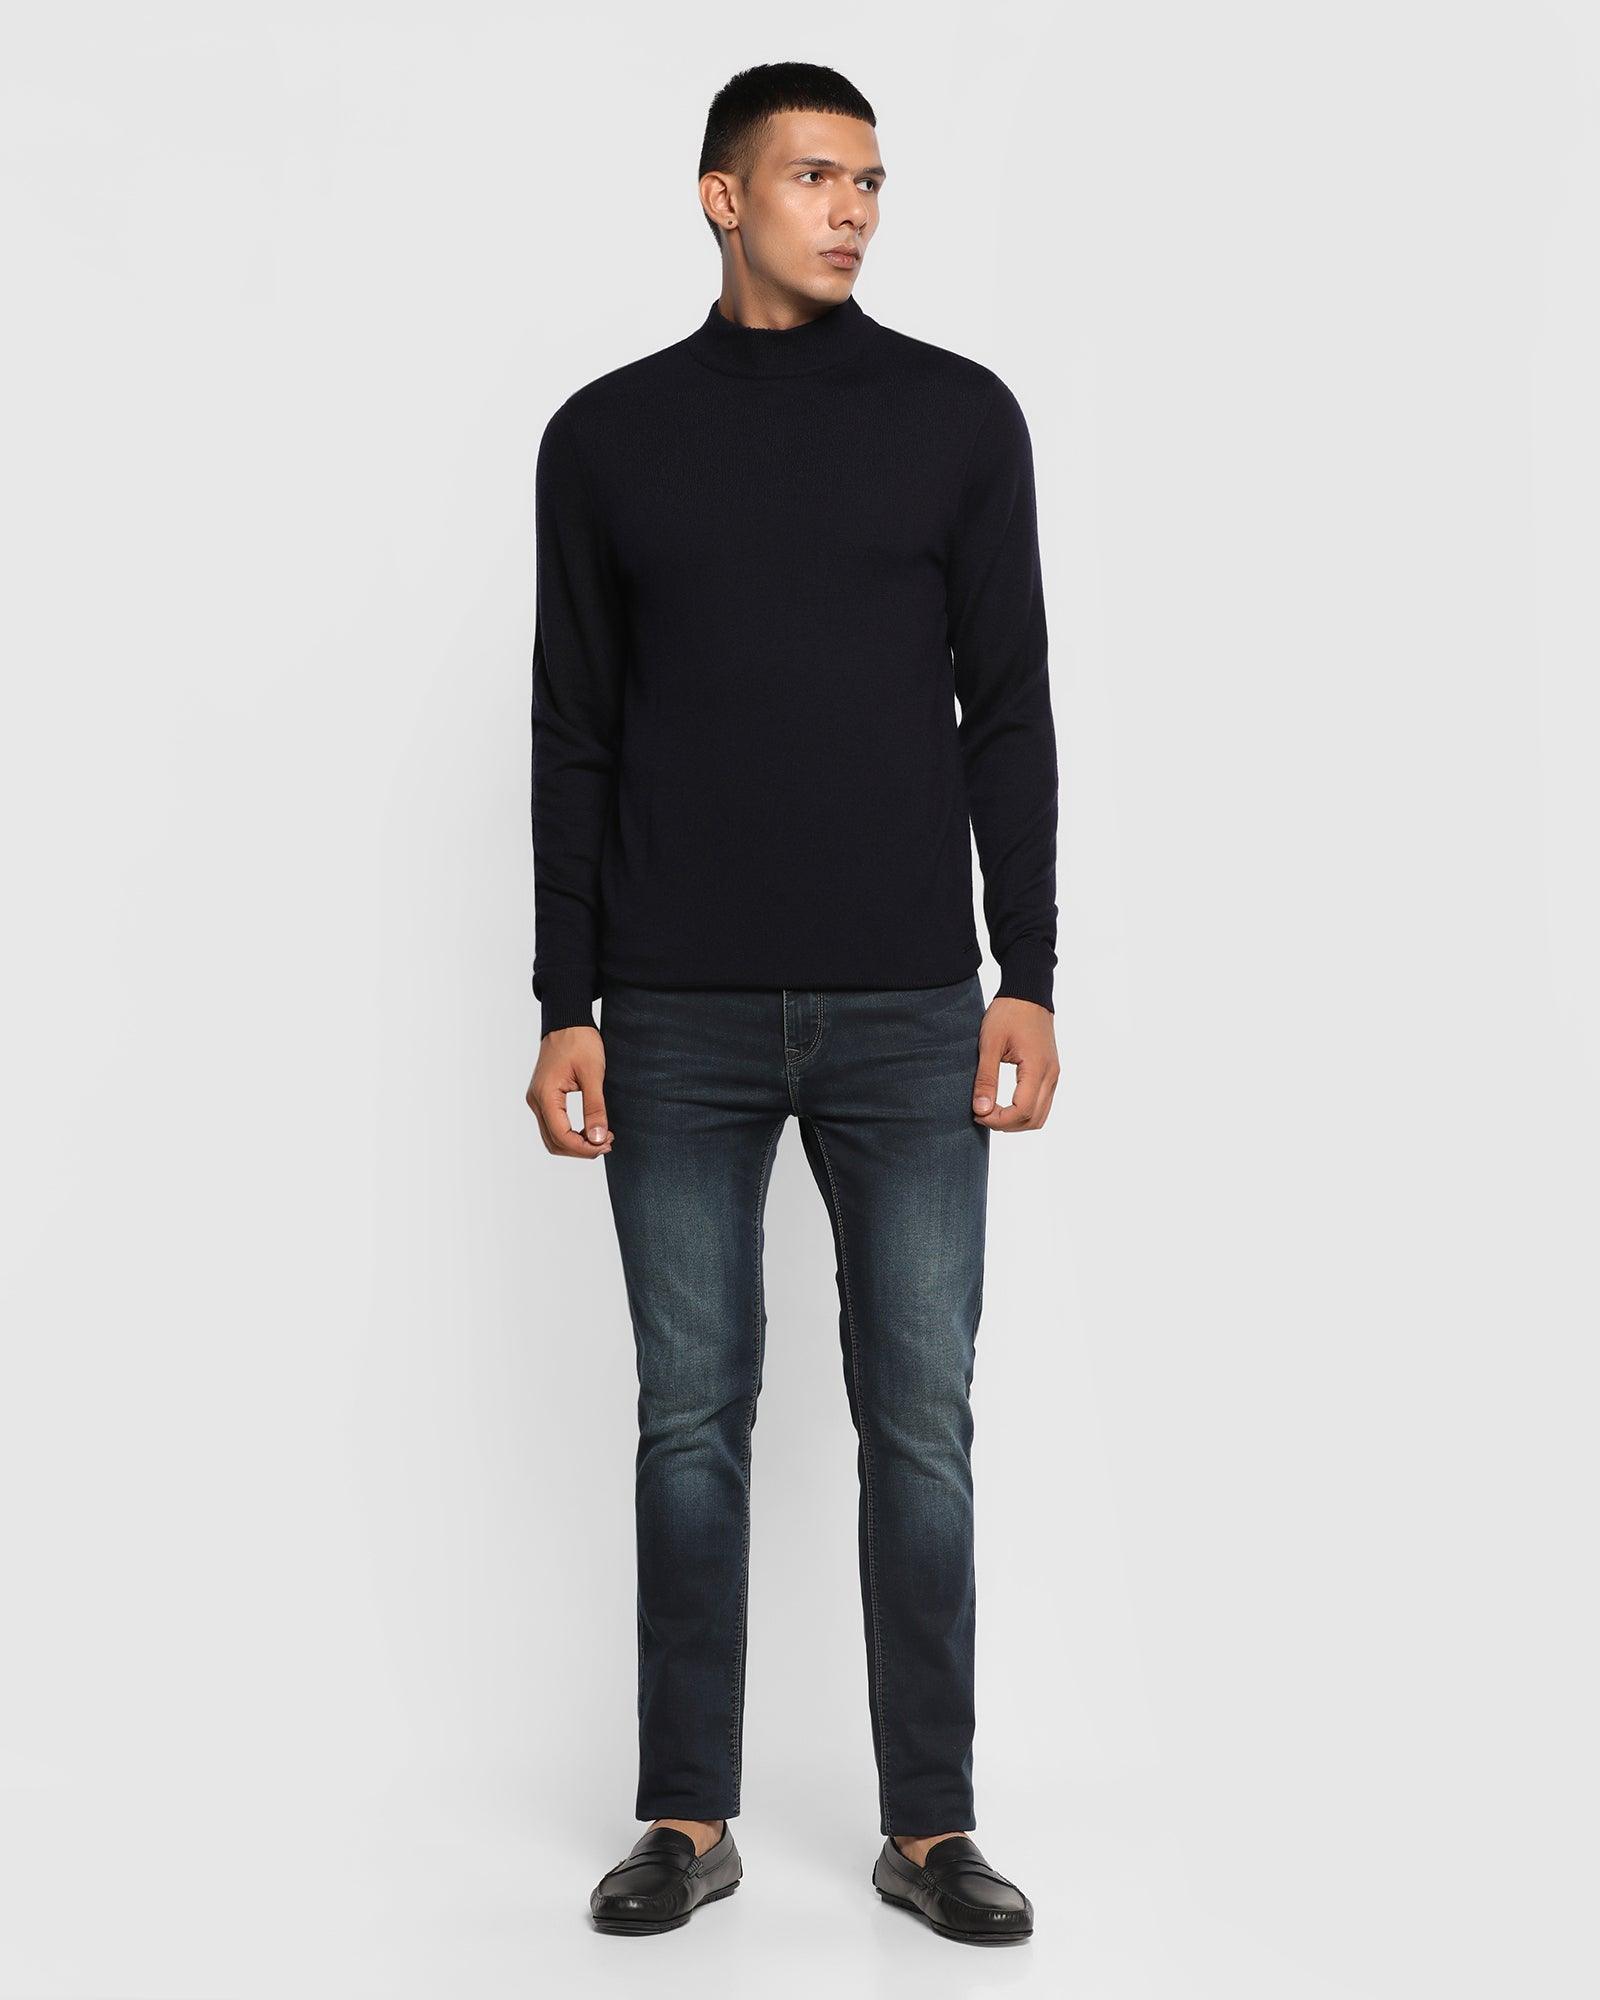 Stylized Collar Navy Solid Sweater - Domin